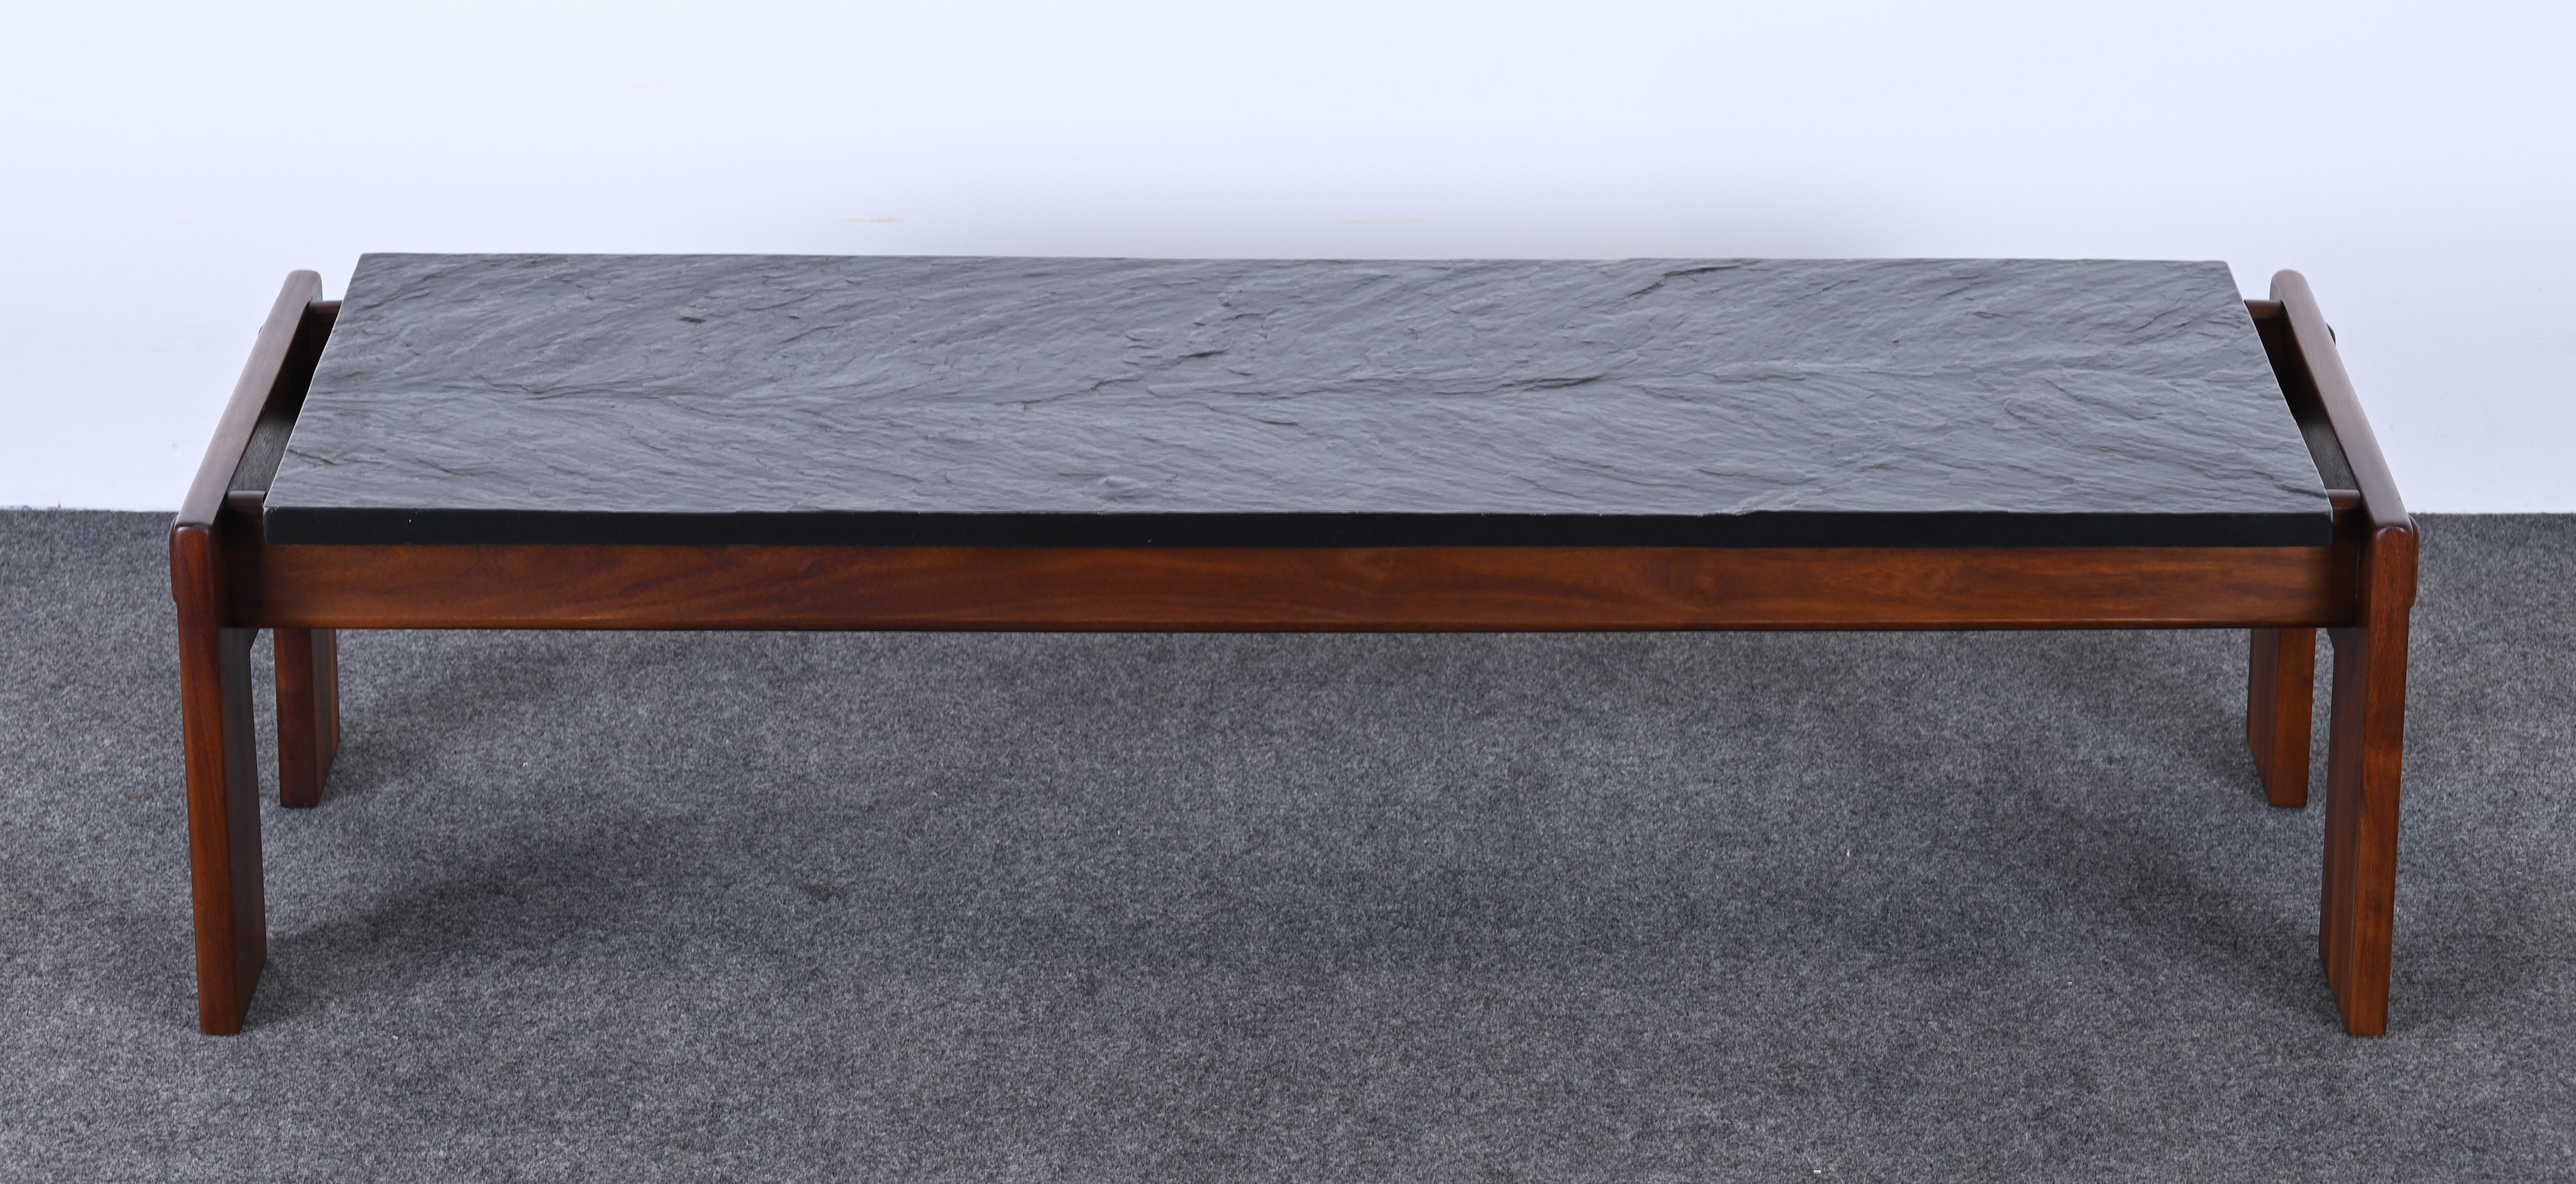 American Walnut and Slate Coffee Table by Adrian Pearsall for Craft Associates, 1960s